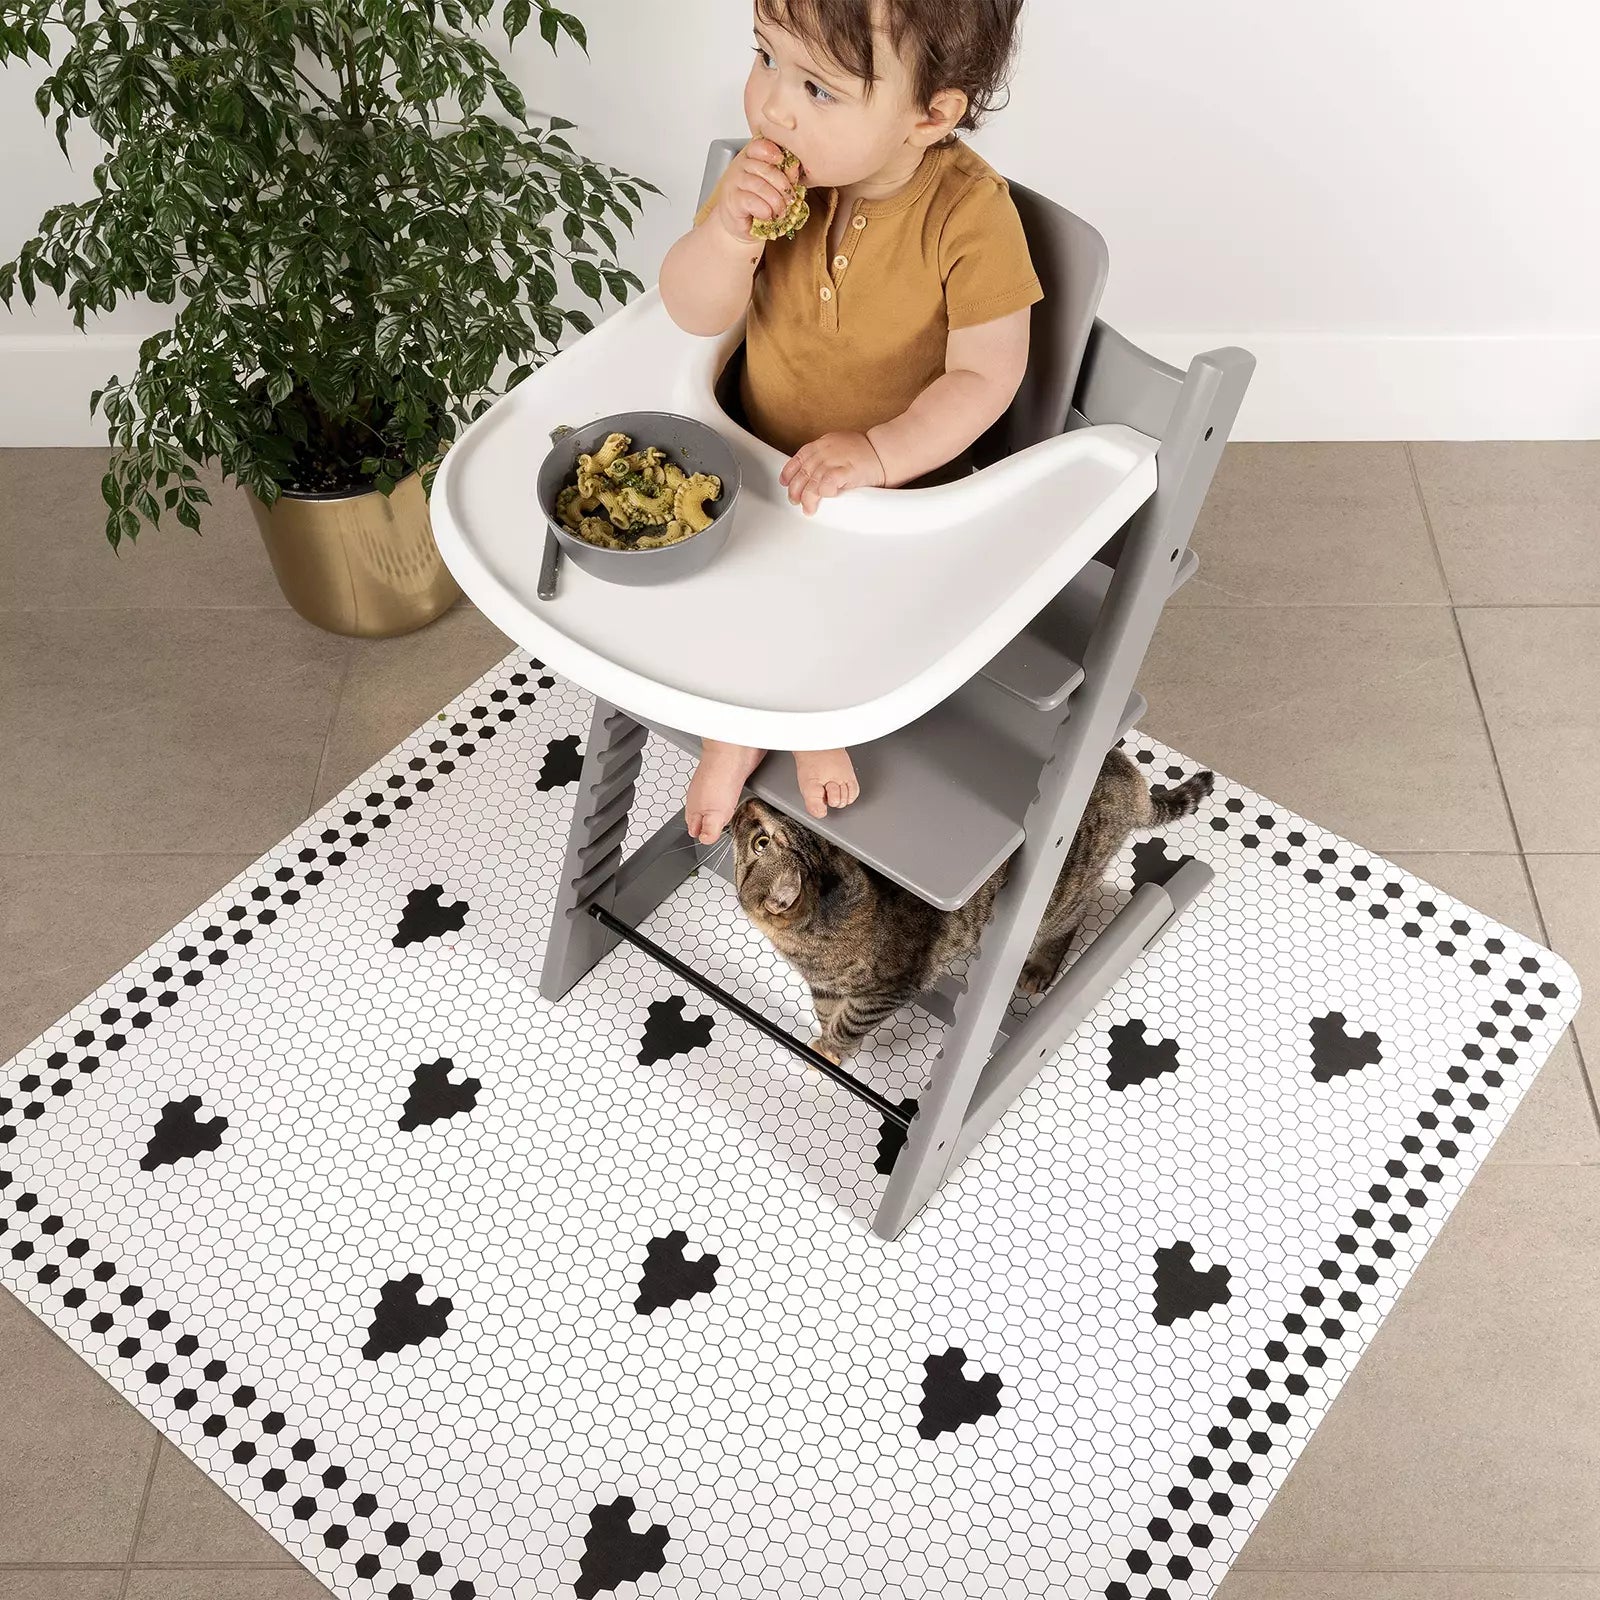 Penny Tile Black and White Heart pattern highchair mat under highchair with baby eating